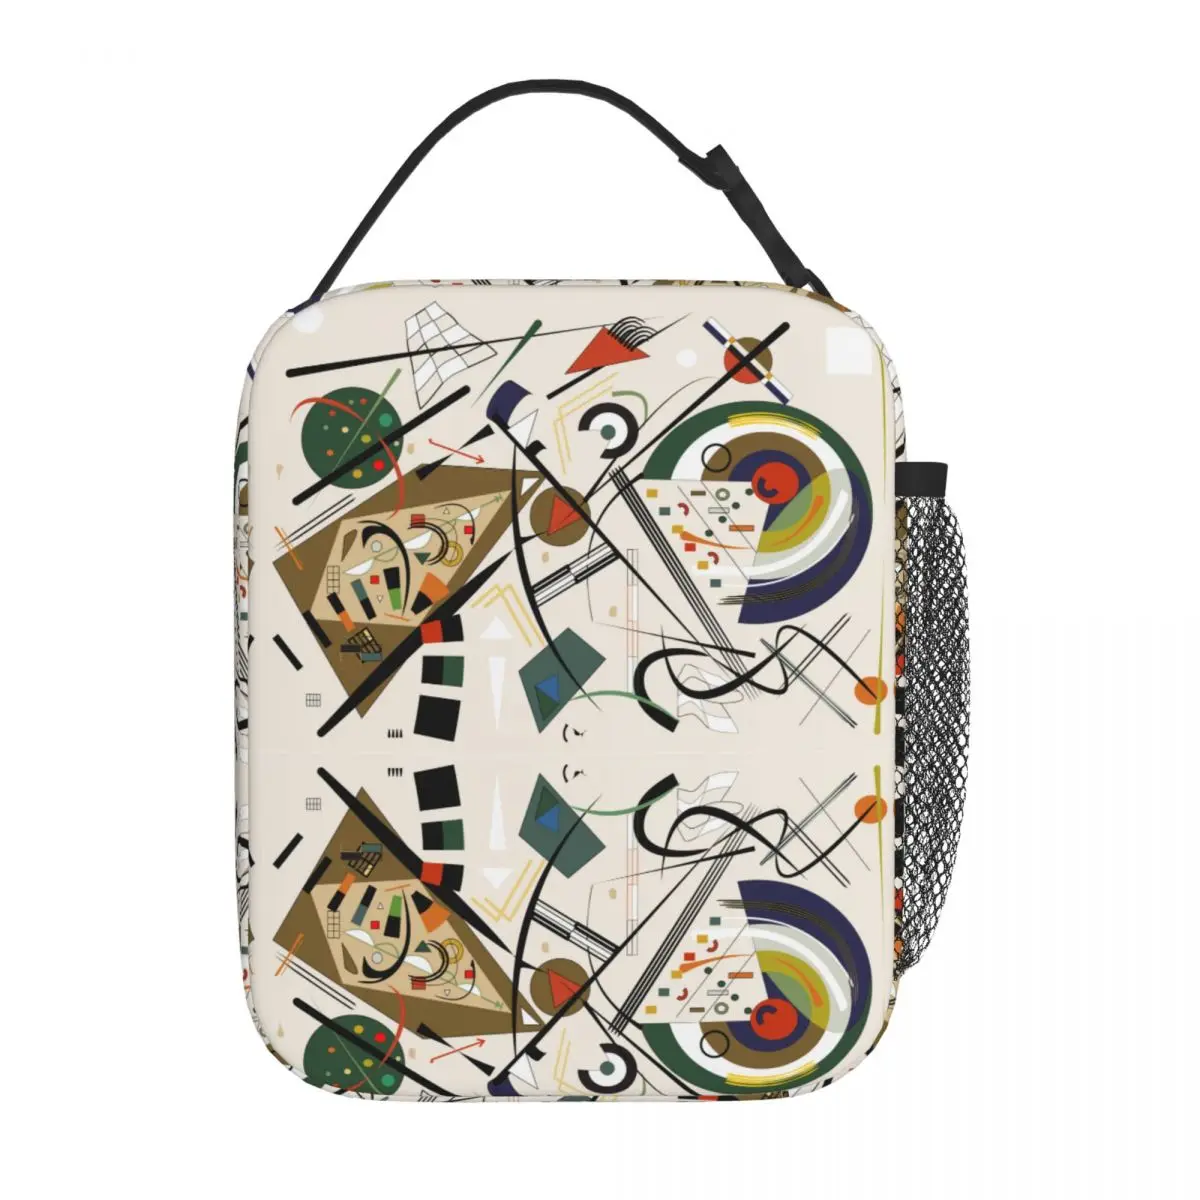 

Wassily Kandinsky Art Thermal Insulated Lunch Bags Work Fancy Expressionism Portable Bento Box Thermal Cooler Food Box